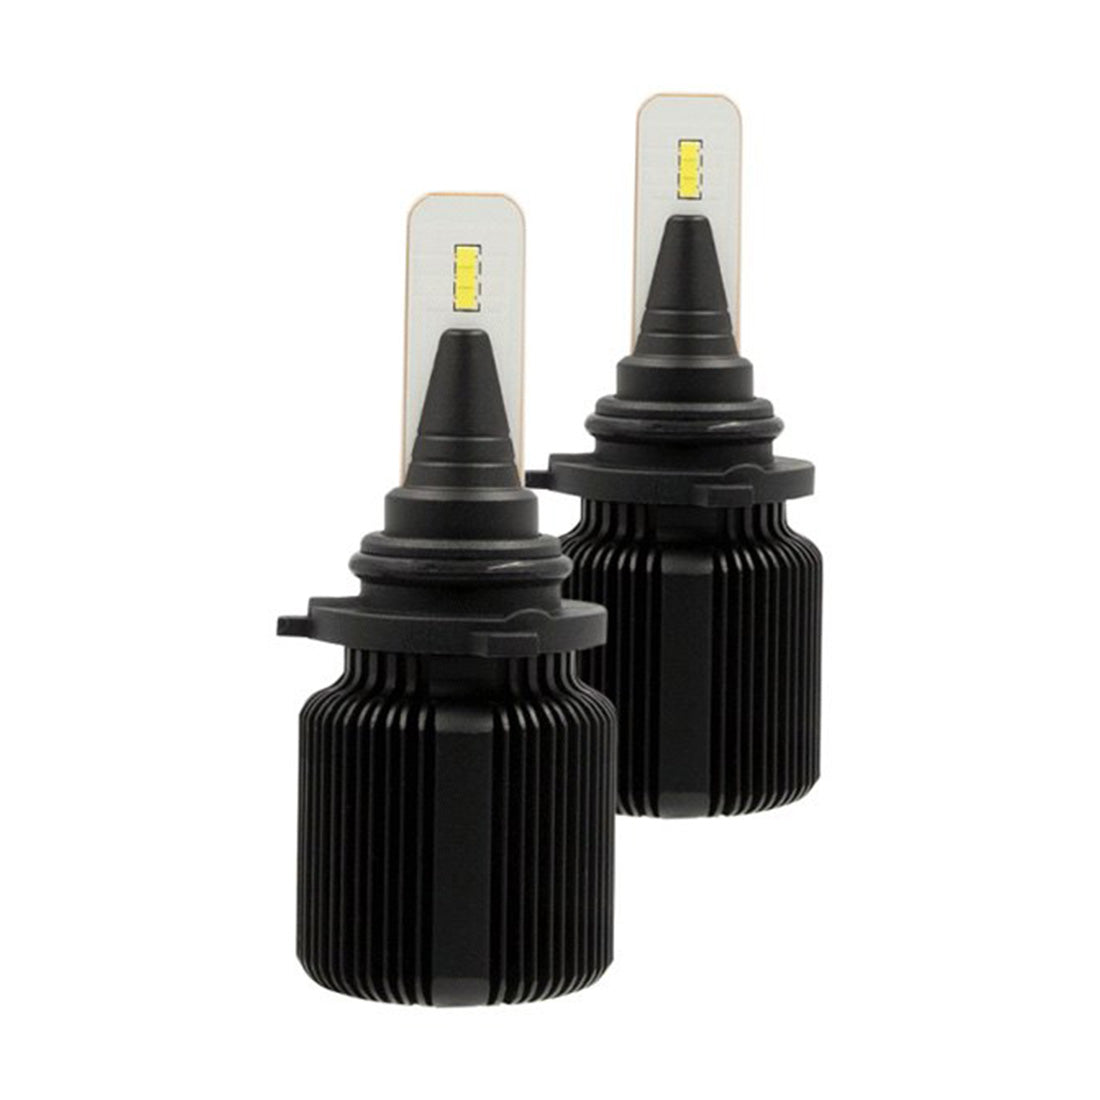 Metra DL-9006 Single-Beam Replacement 9006 LED Bulbs - Pair (20W Each)